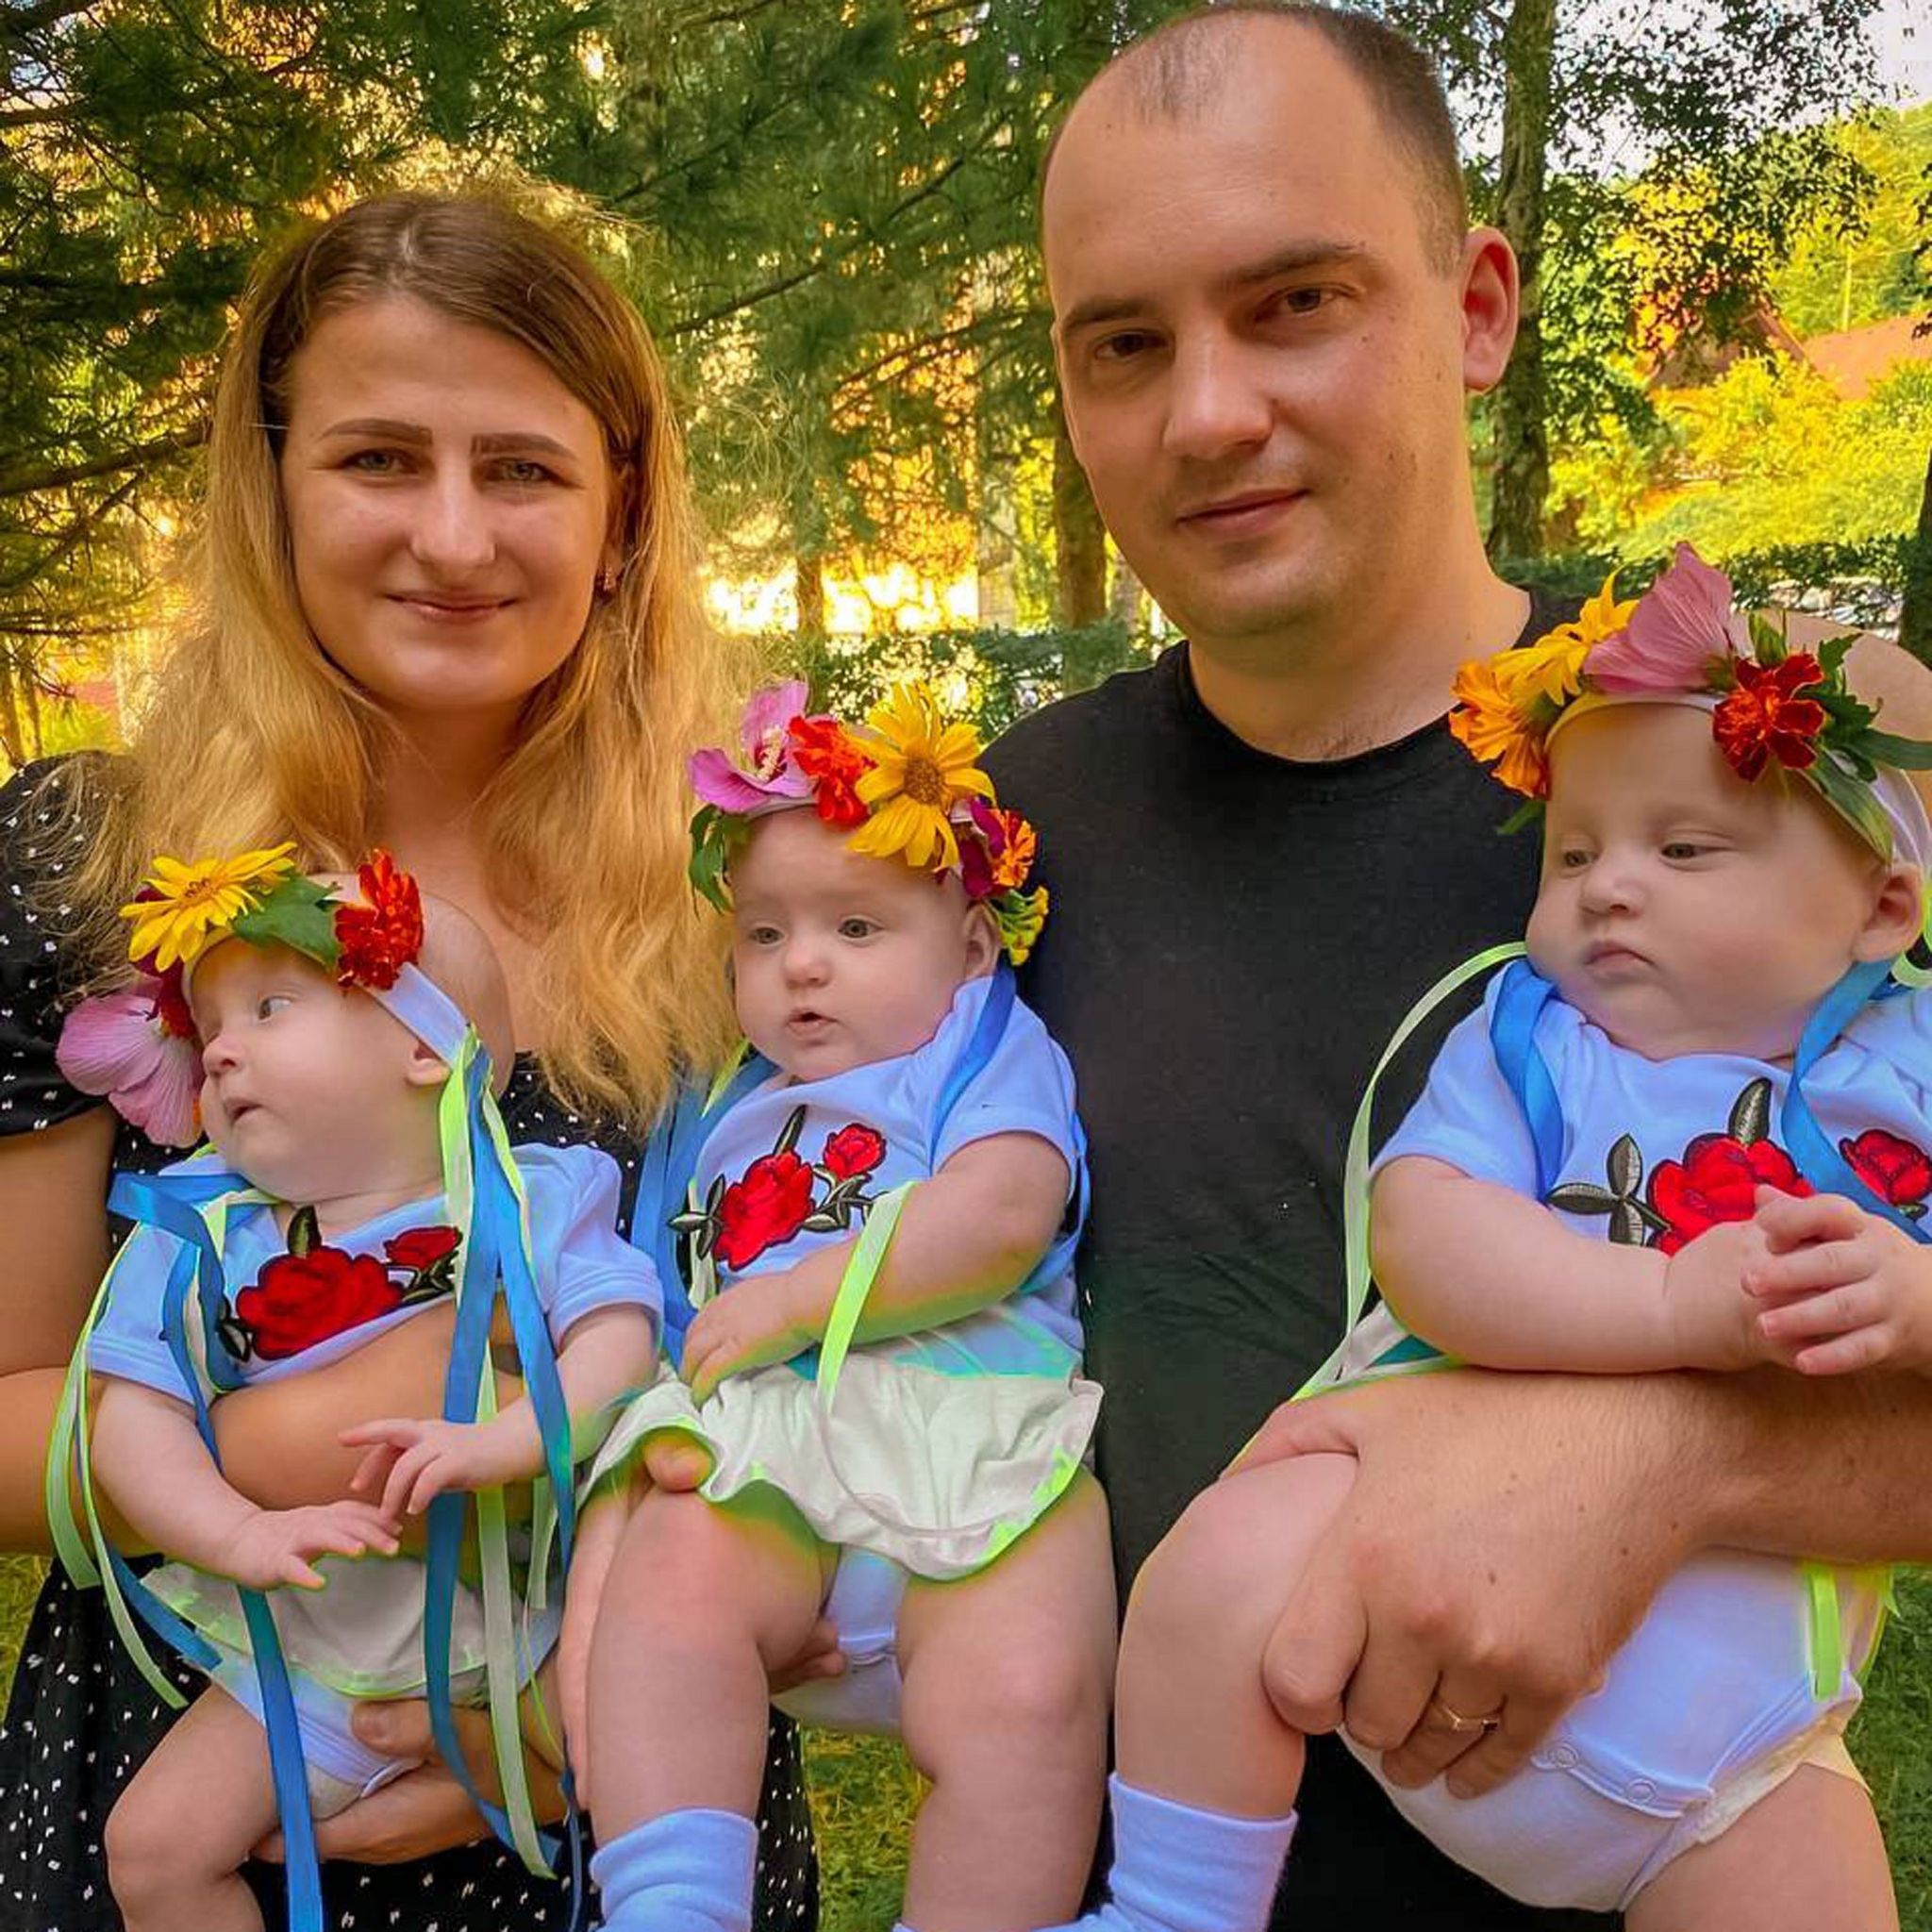 Hanna and Andriy holding their three daughters